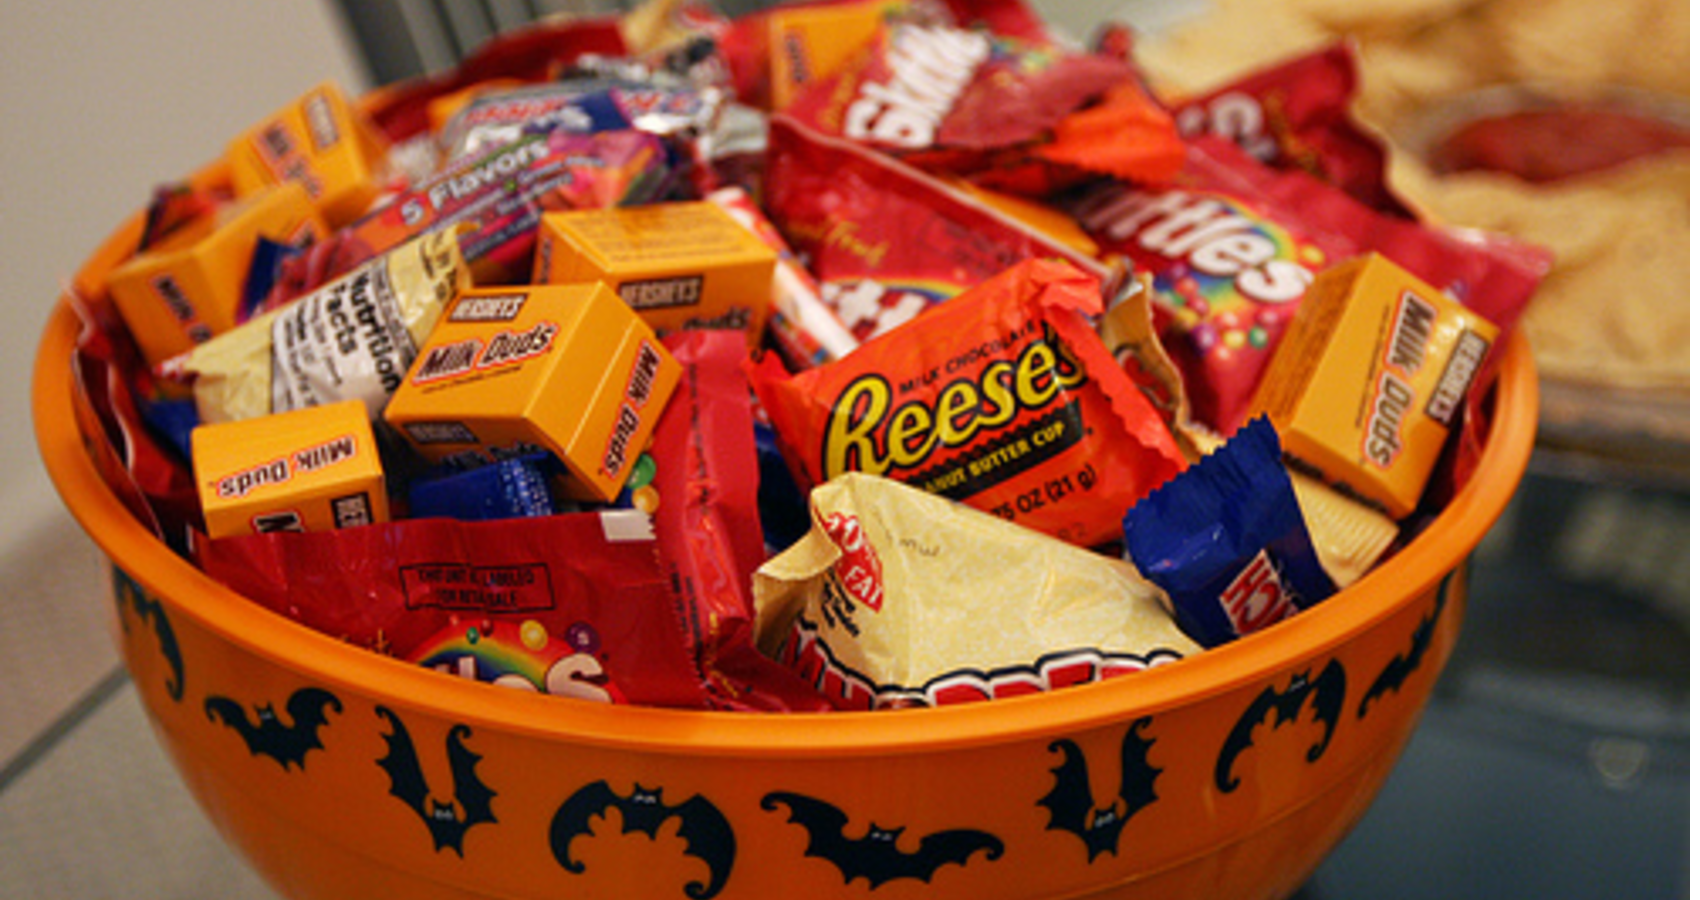 A bowl full of Halloween candy